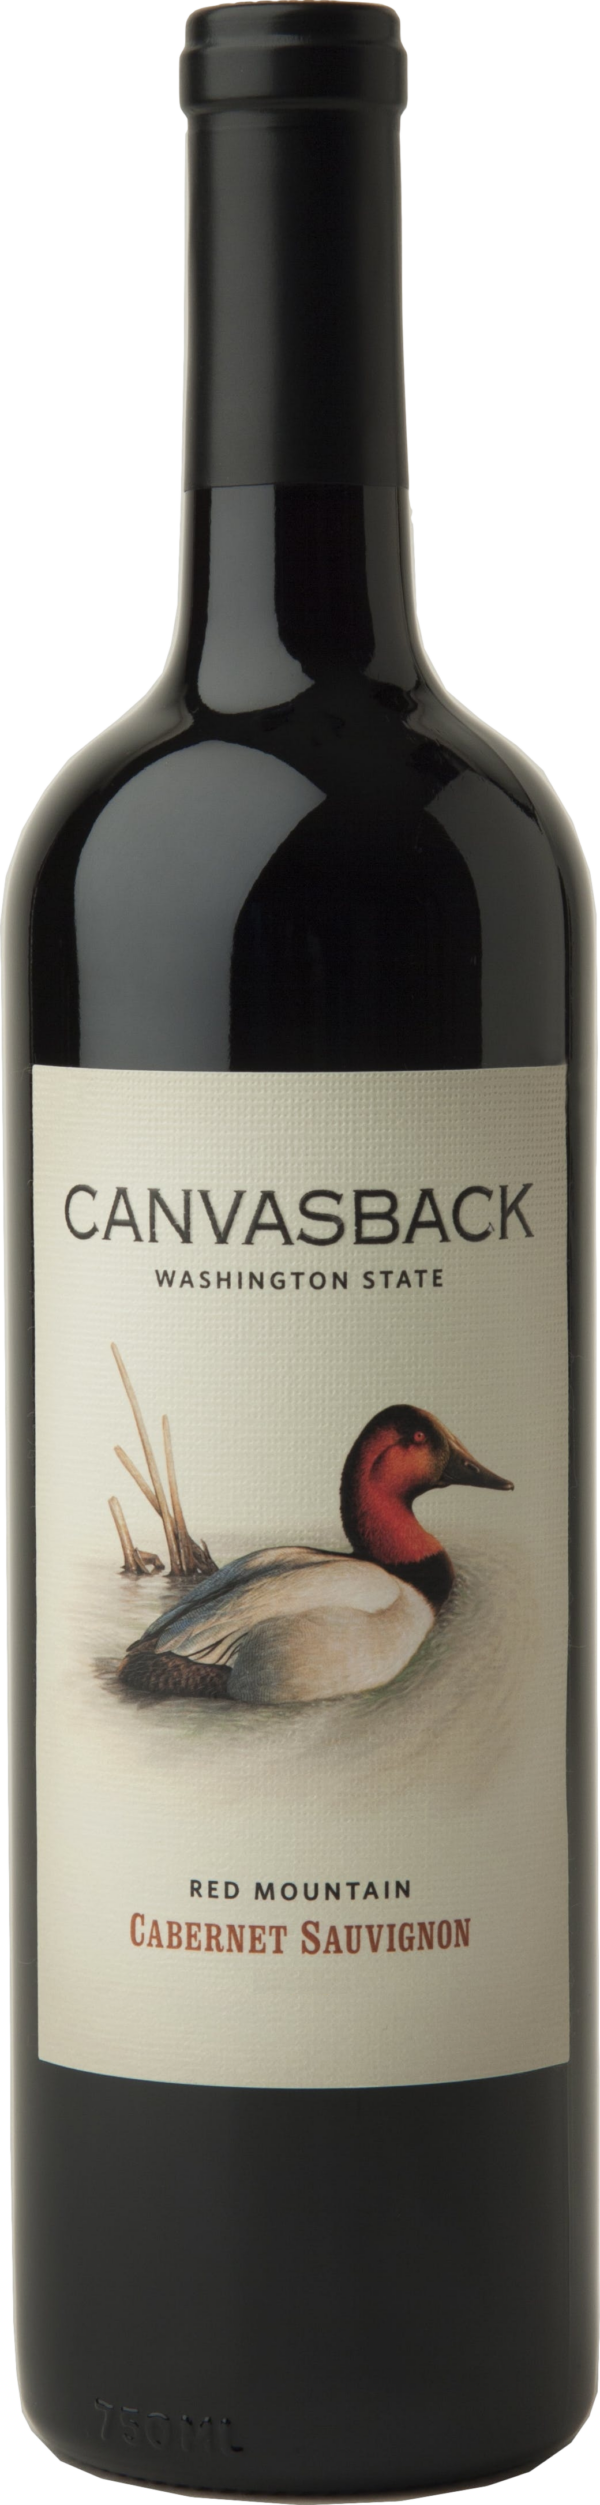 Product image of Duckhorn Canvasback Cabernet Sauvignon 2018 from 8wines